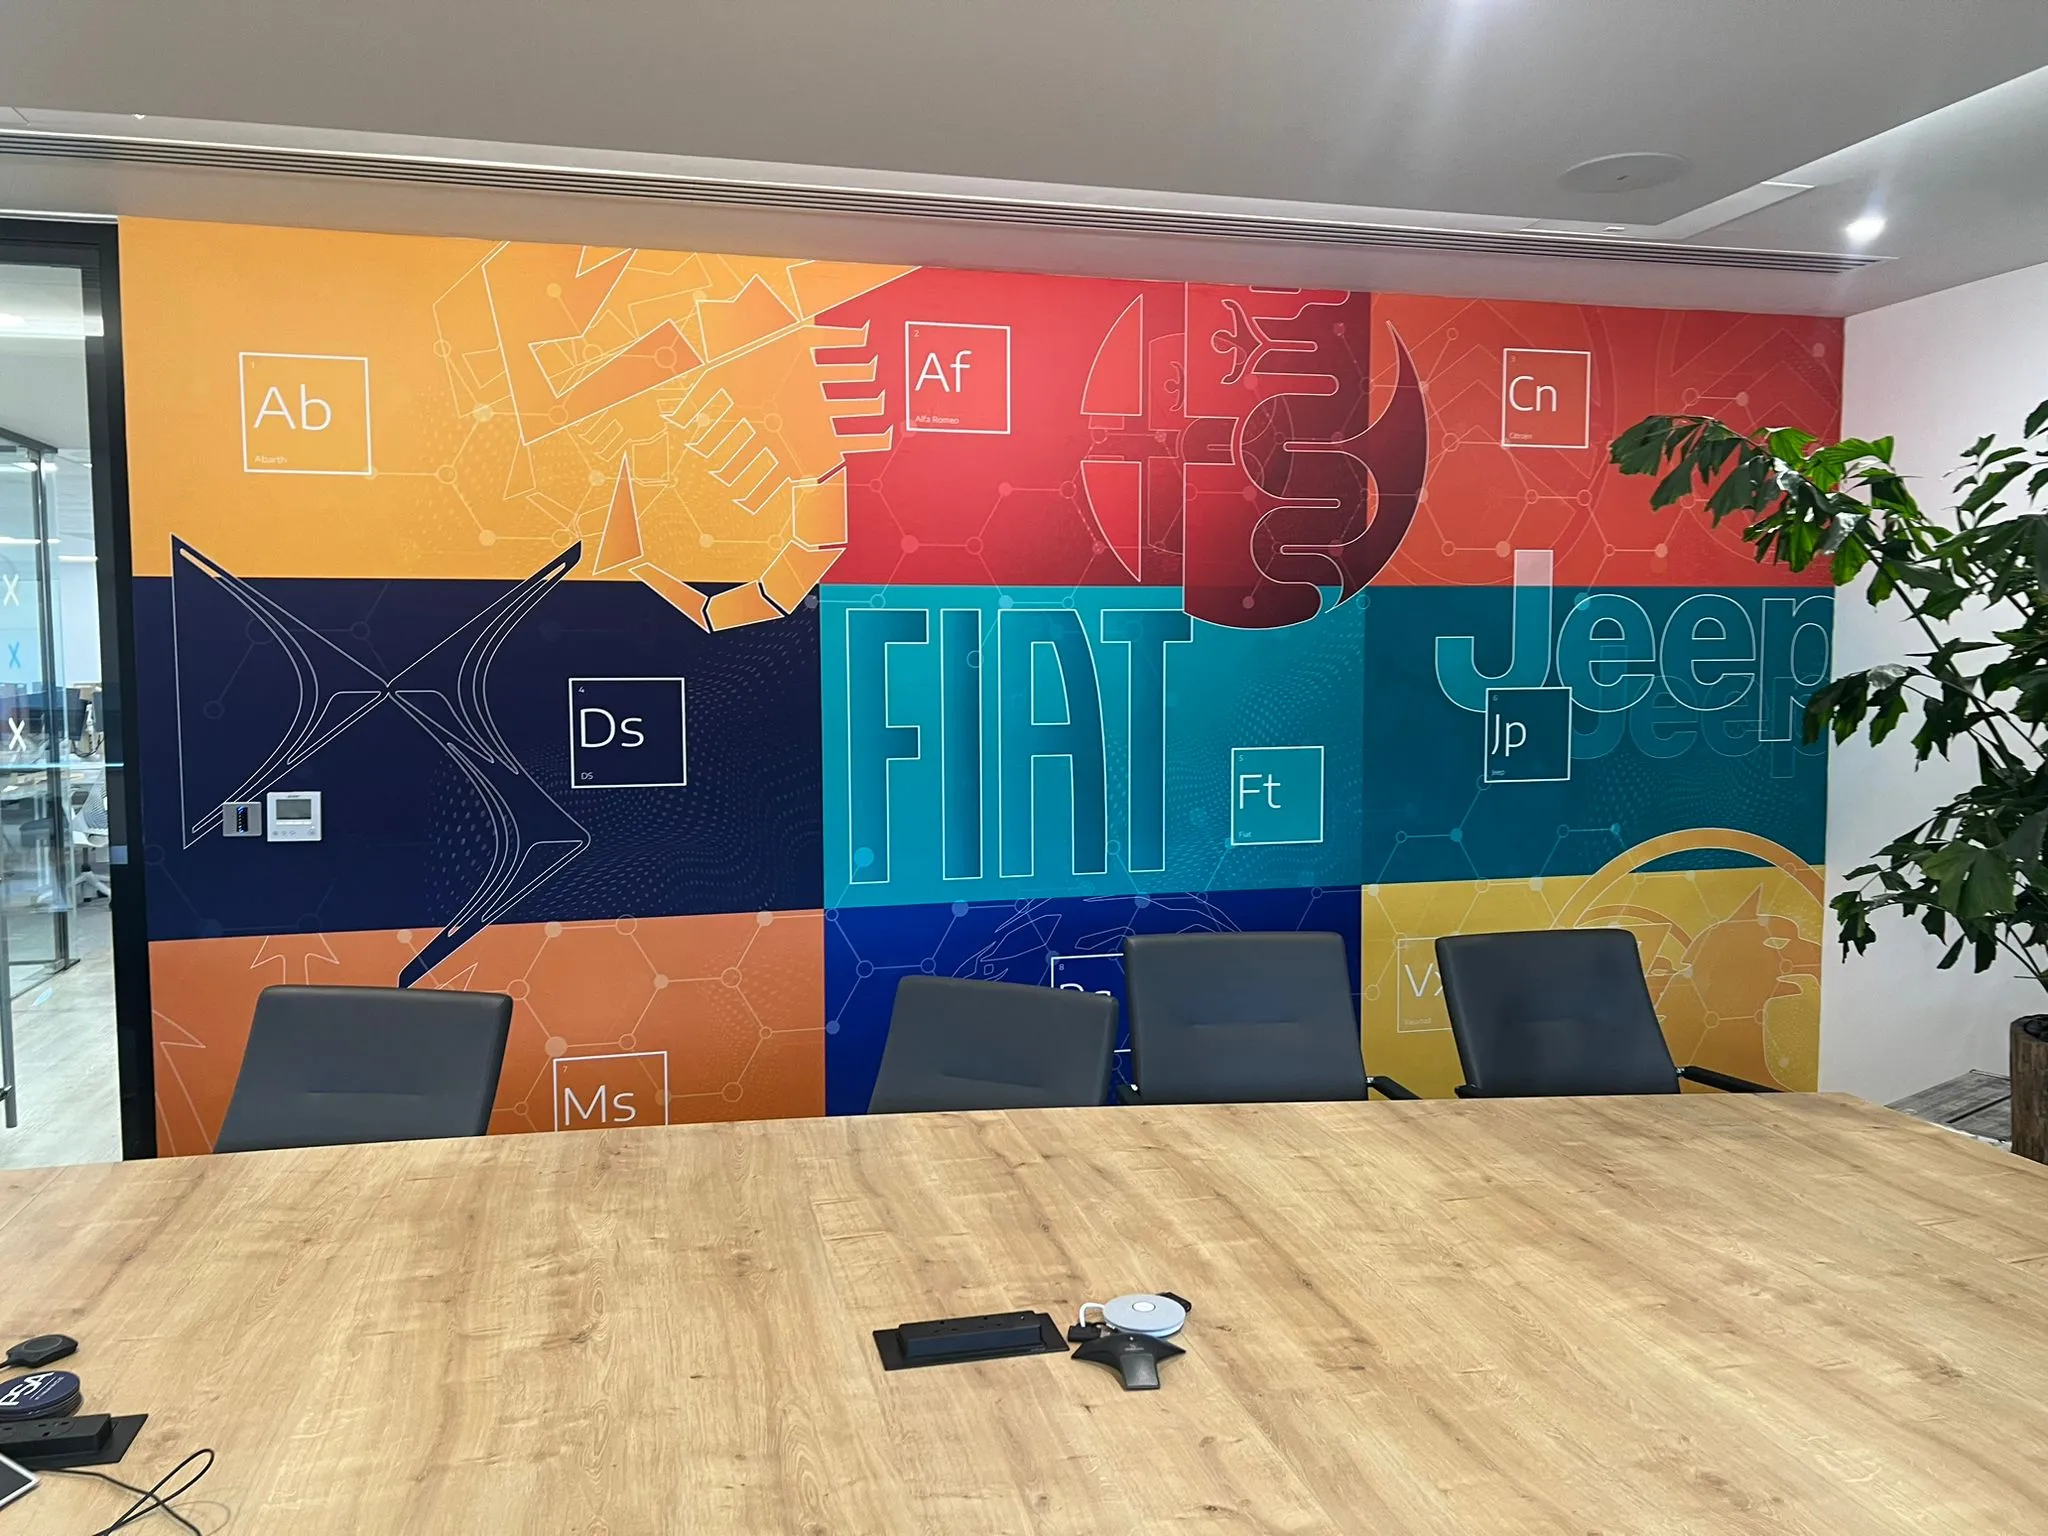 Image of meeting rooms with new branding